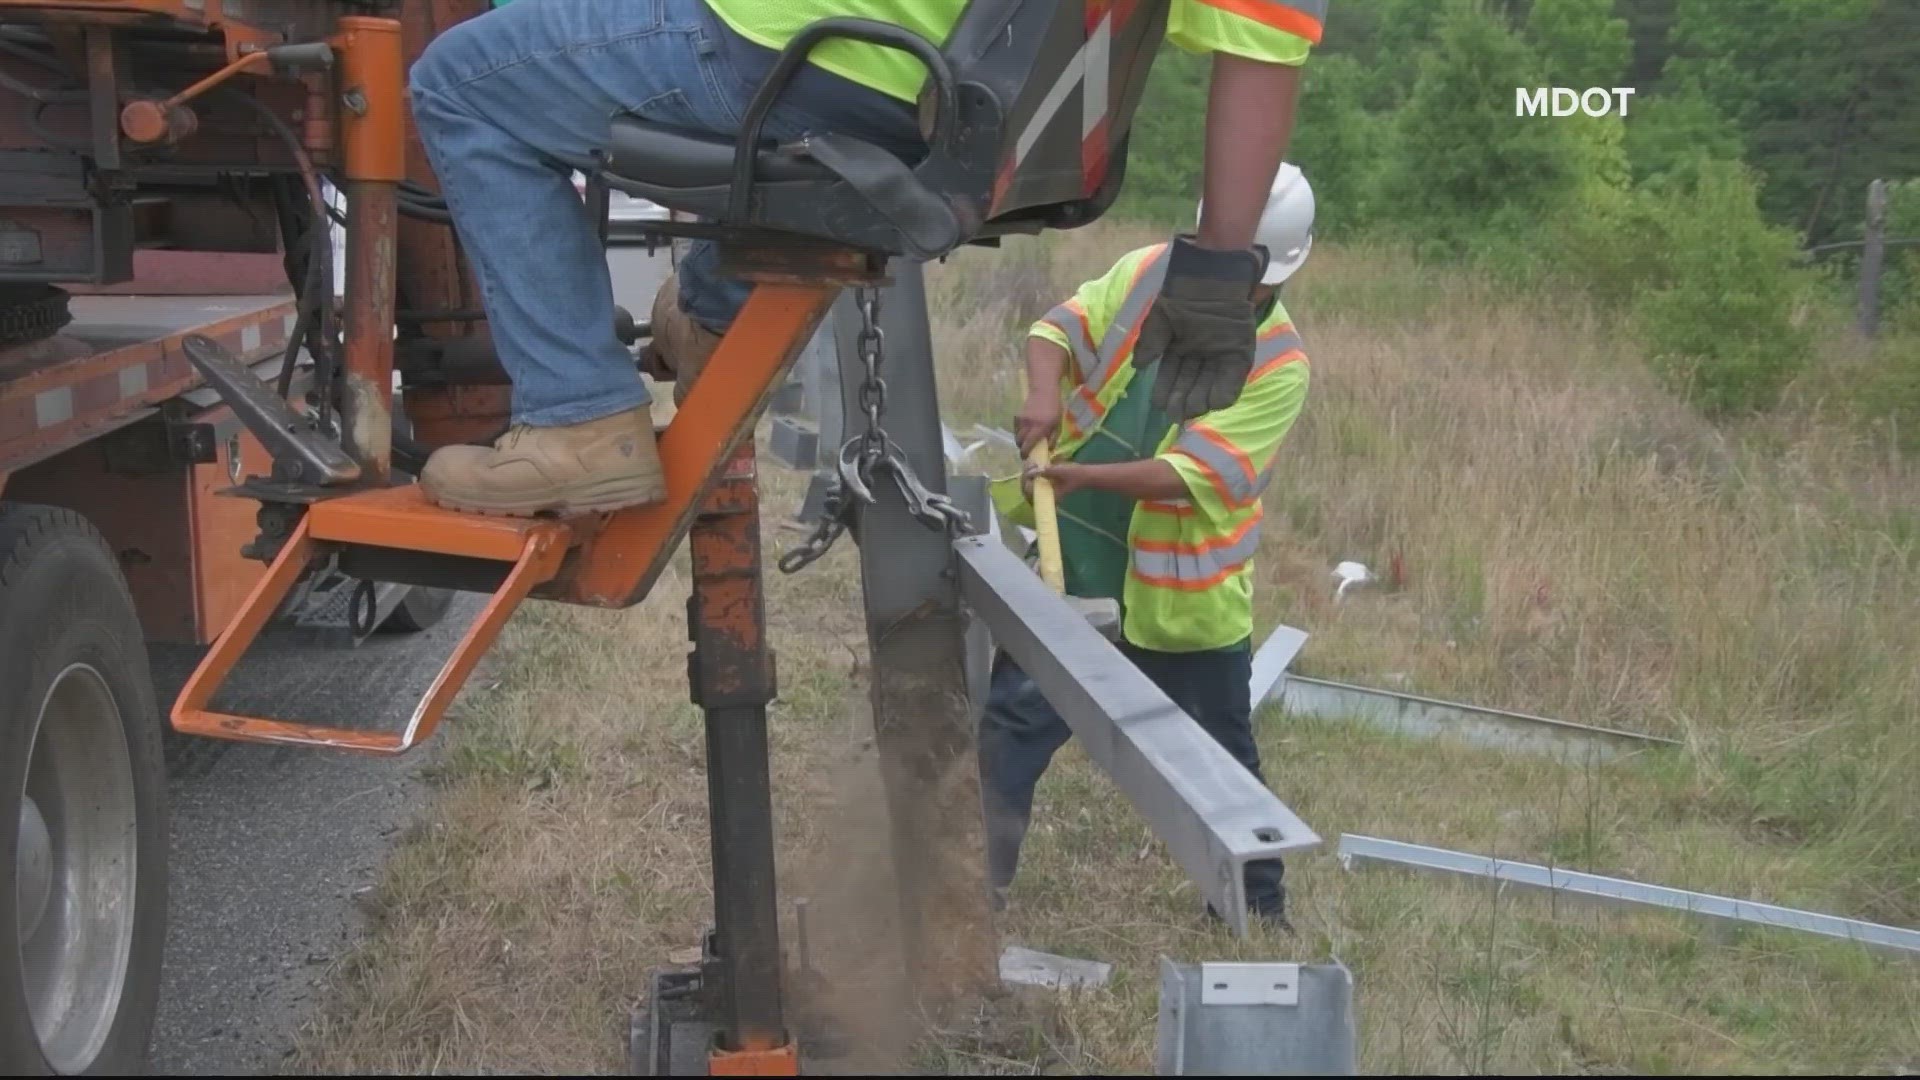 The Maryland Department of Transportation is replacing dozens of guardrails on the side of I-95 in Laurel, after our investigation identified safety hazards.